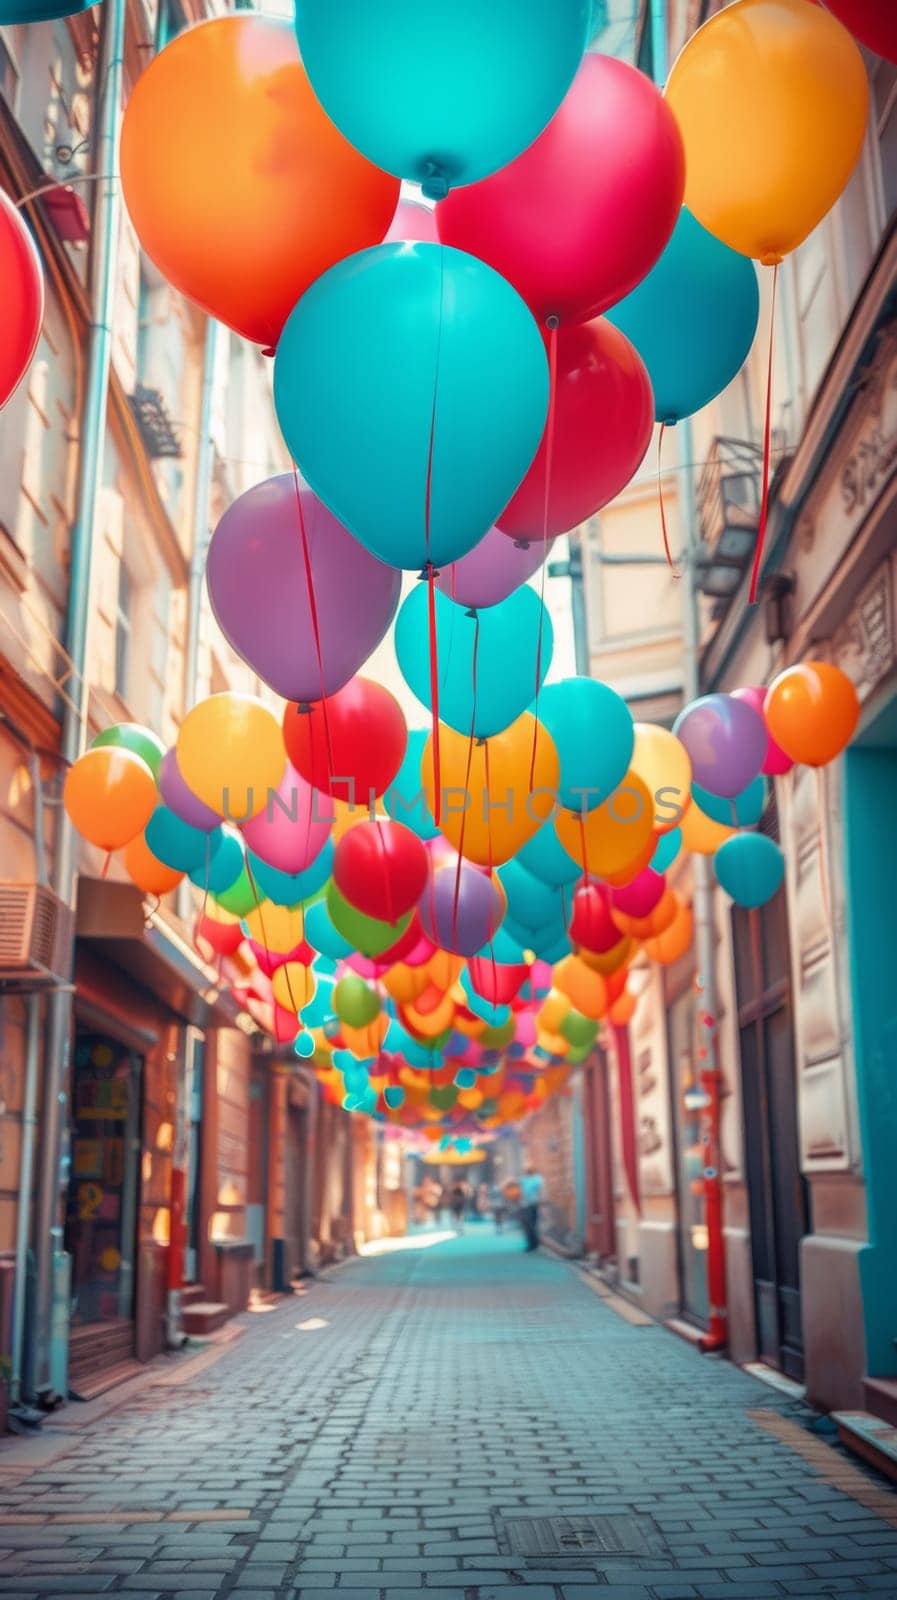 A street with many balloons floating in the air above it